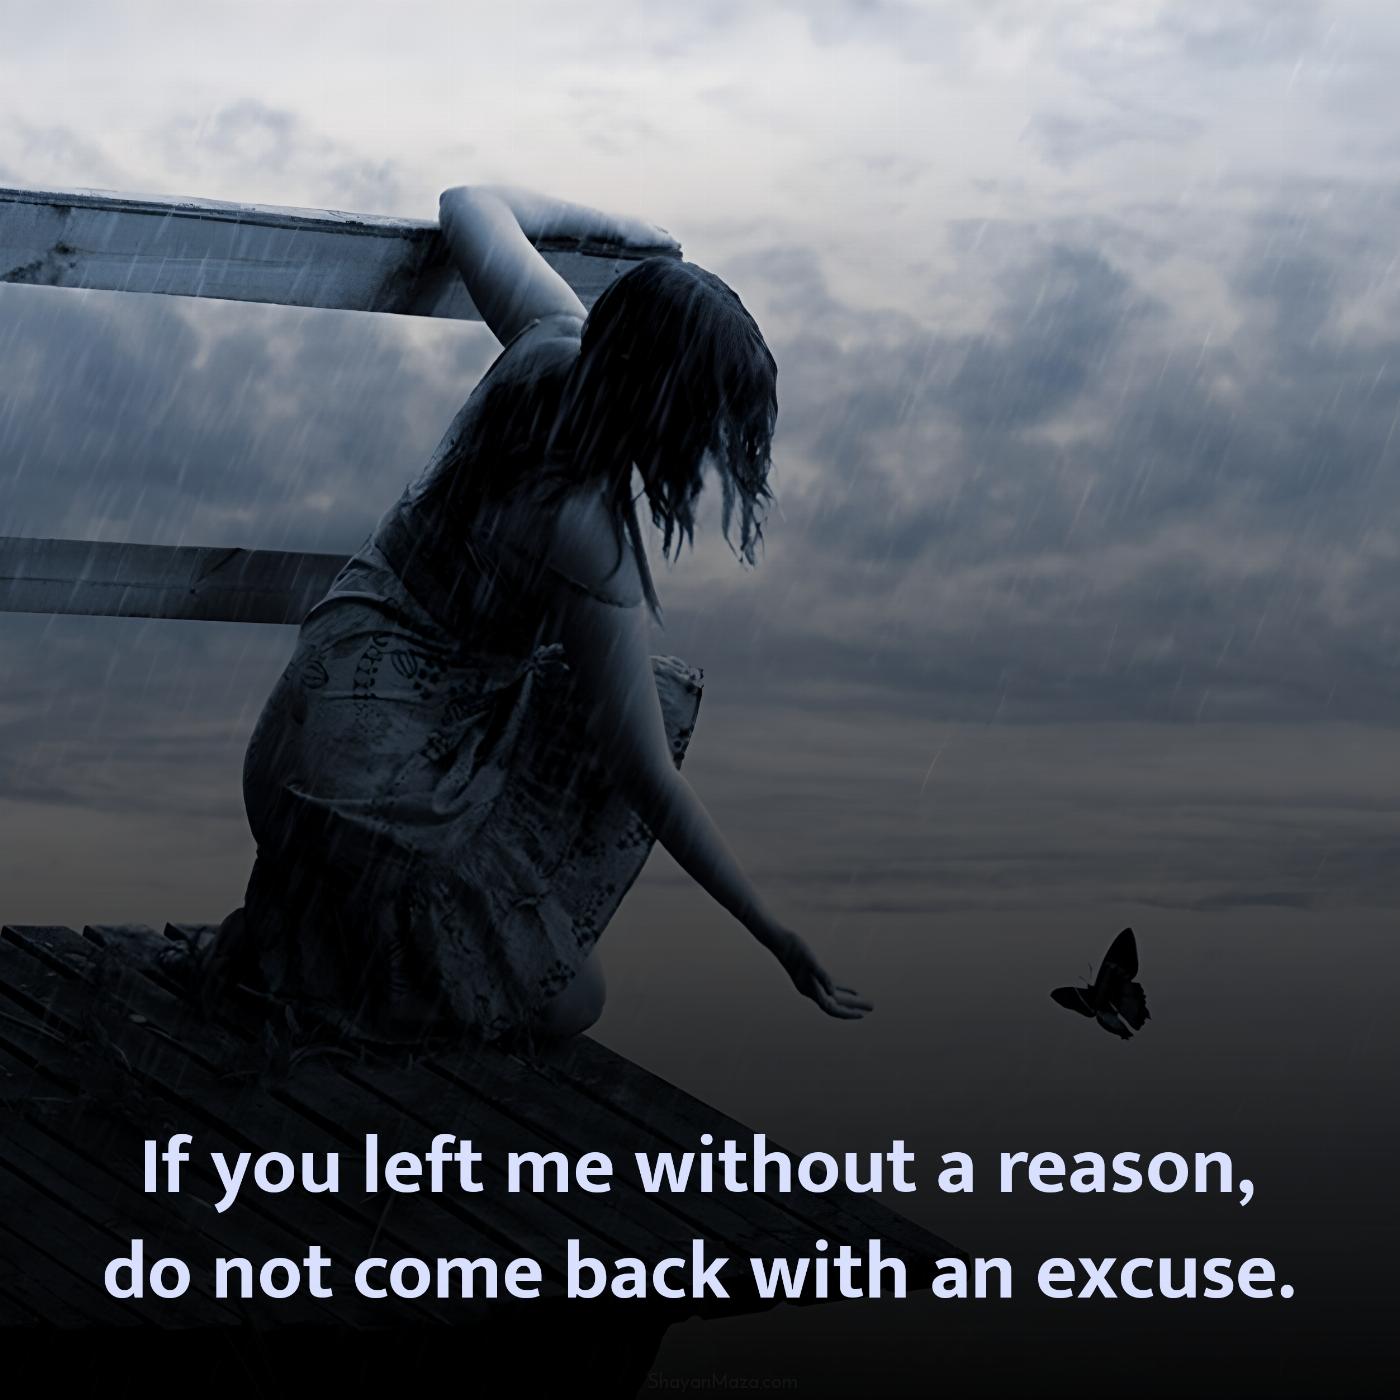 If you left me without a reason do not come back